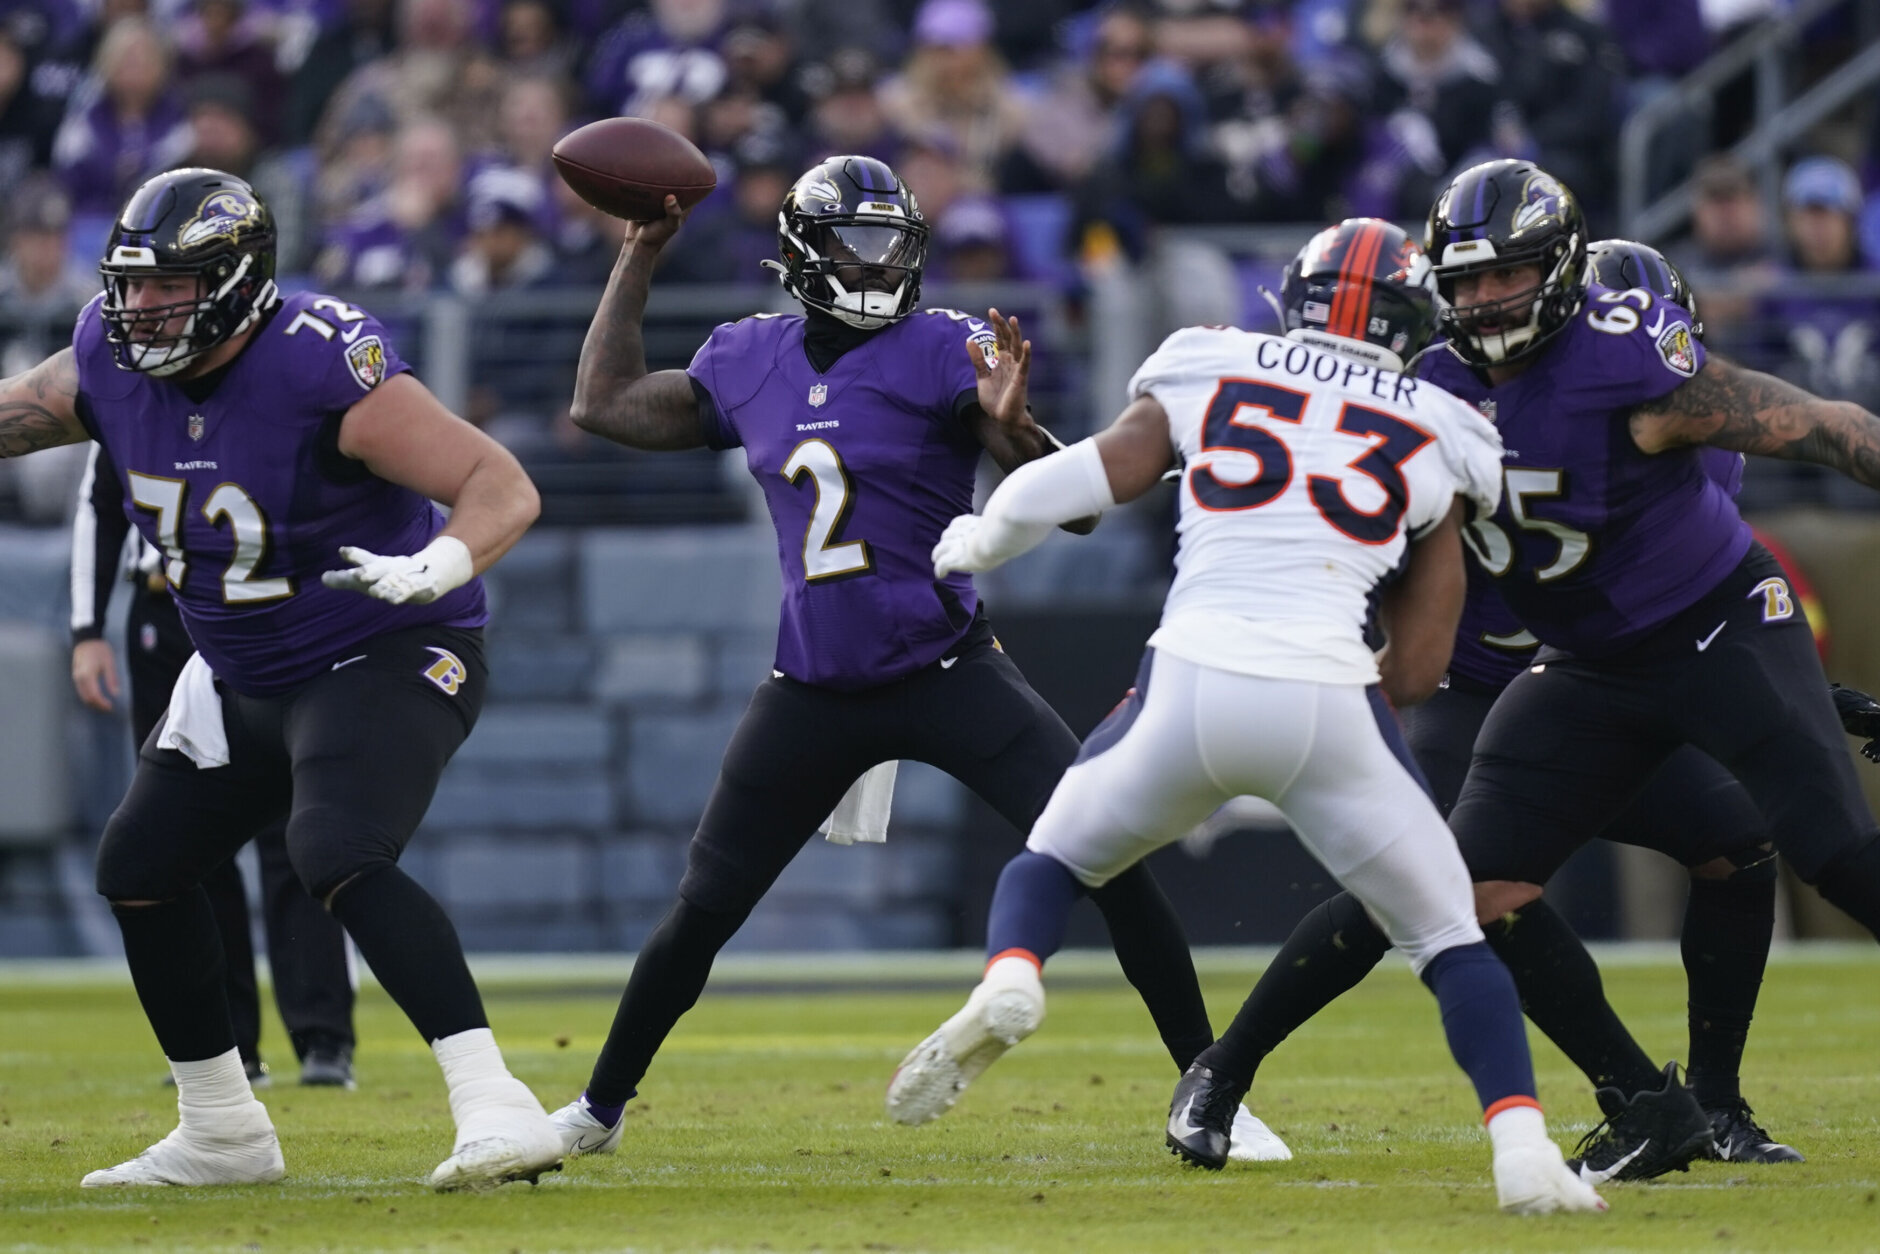 <p><em><strong>Broncos 9</strong></em><br />
<em><strong>Ravens 10</strong></em></p>
<p>Baltimore finally found the recipe … you can&#8217;t blow a 4th quarter lead if you don&#8217;t have one!</p>
<p>But seriously, the Ravens&#8217; season comes down to how they fare in Cincinnati to finish the season. So, as long as Lamar Jackson is ready for that game, it&#8217;s been established they can tread water with Tyler Huntley.</p>
